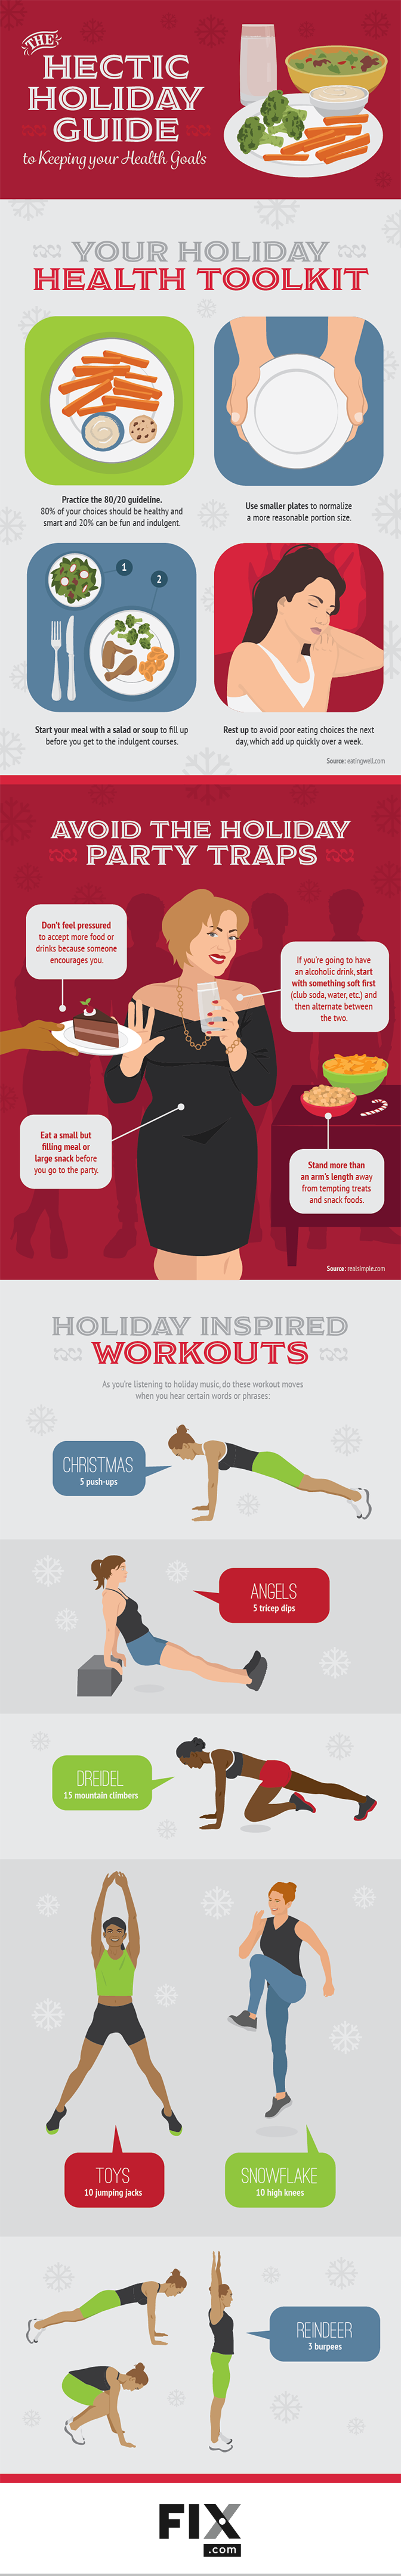 How To Stay Focused On Fitness Goals Throughout The Holidays